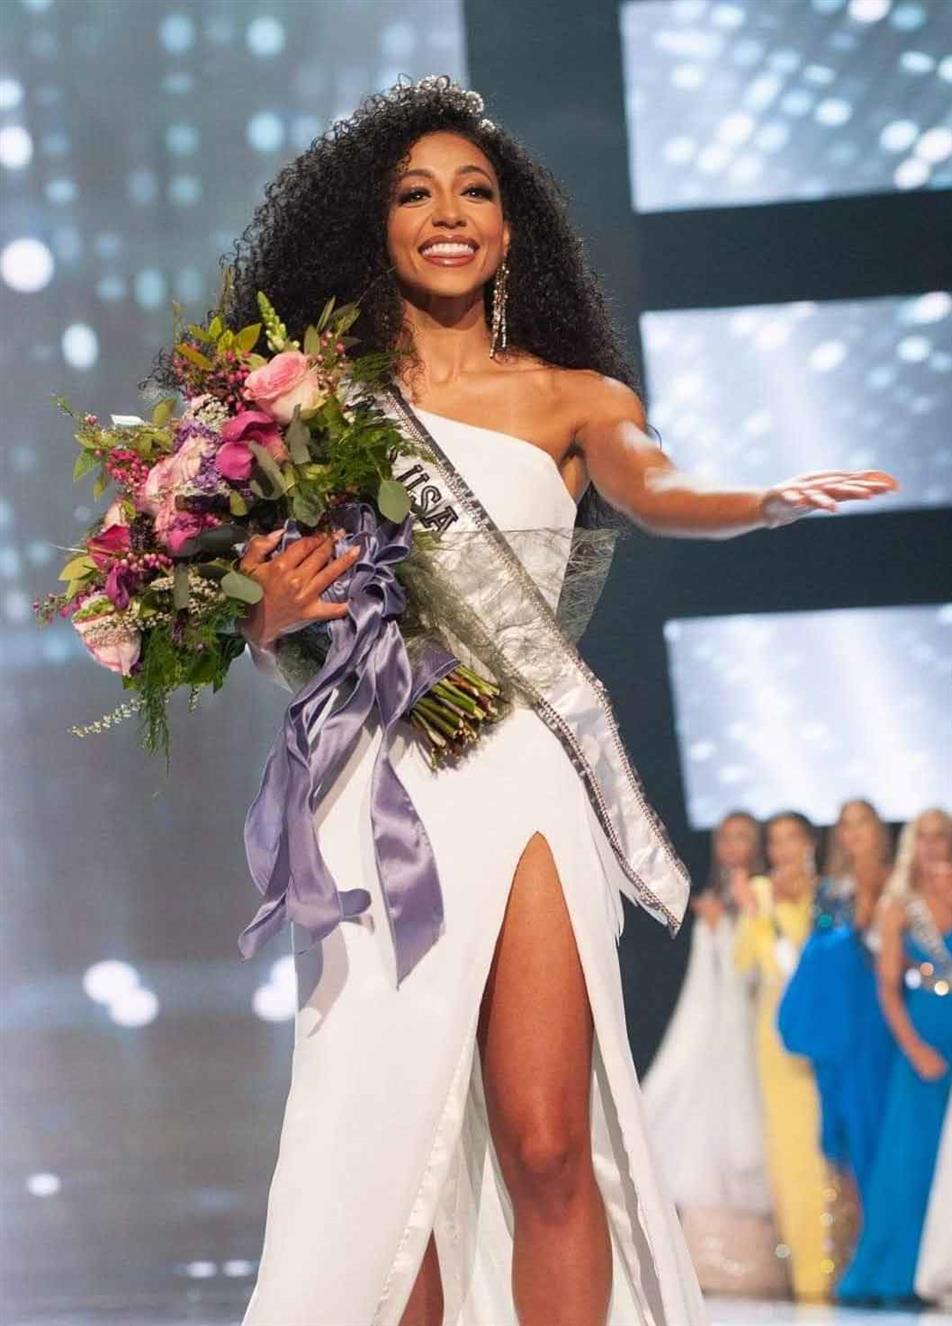 Miss USA 2019 Cheslie Kryst and Miss Universe 2019 Zozibini Tunzi reminisce about their crowning moments